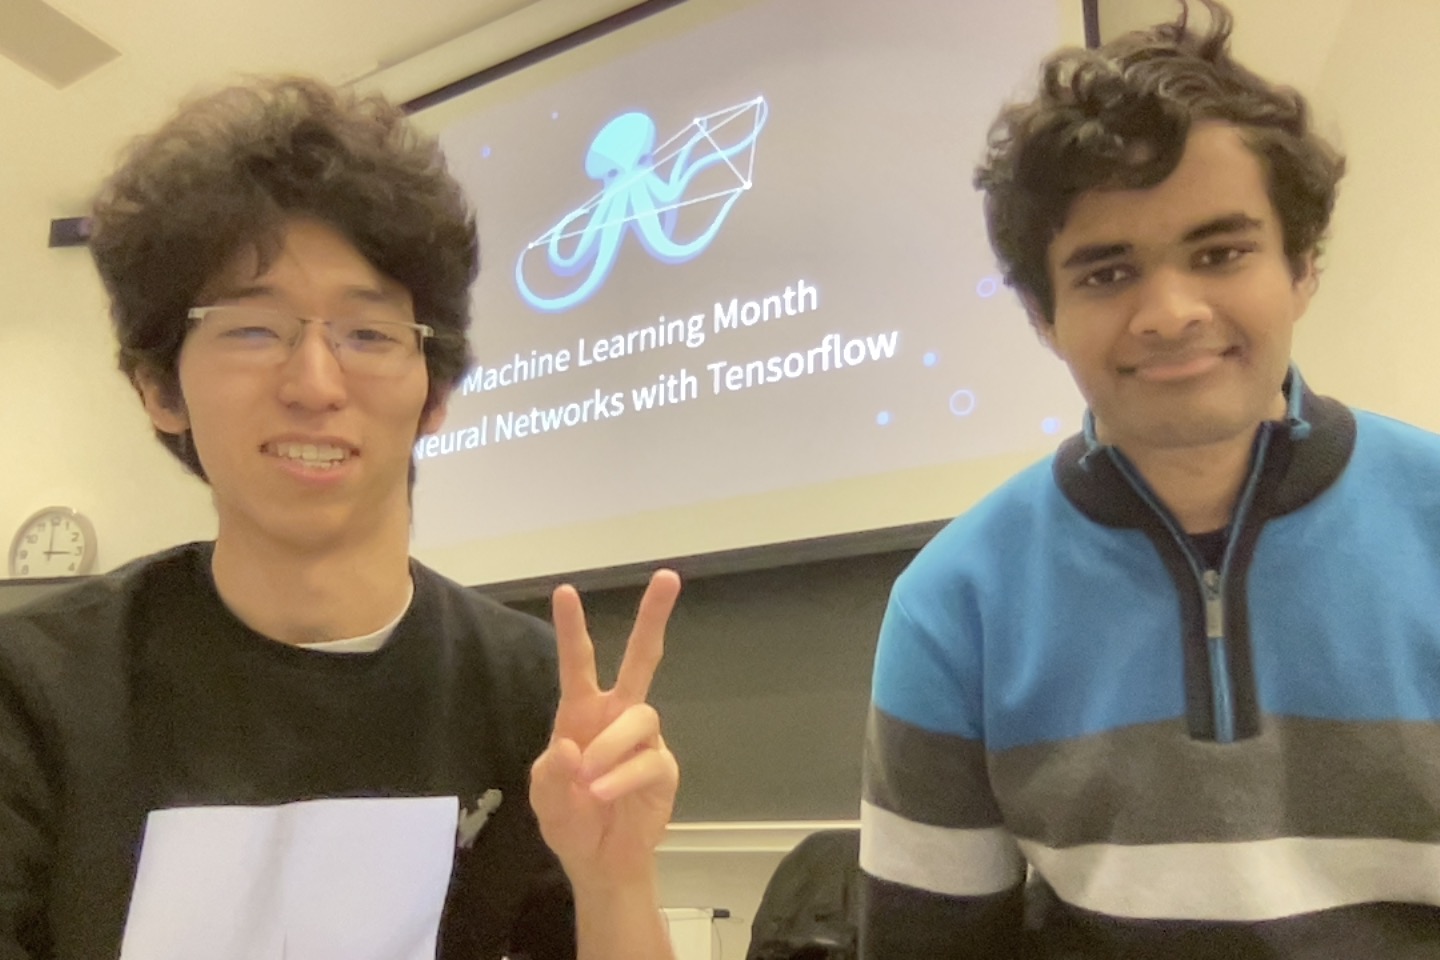 Jeremias and I on the last lecture (Introduction to Neural Networks)